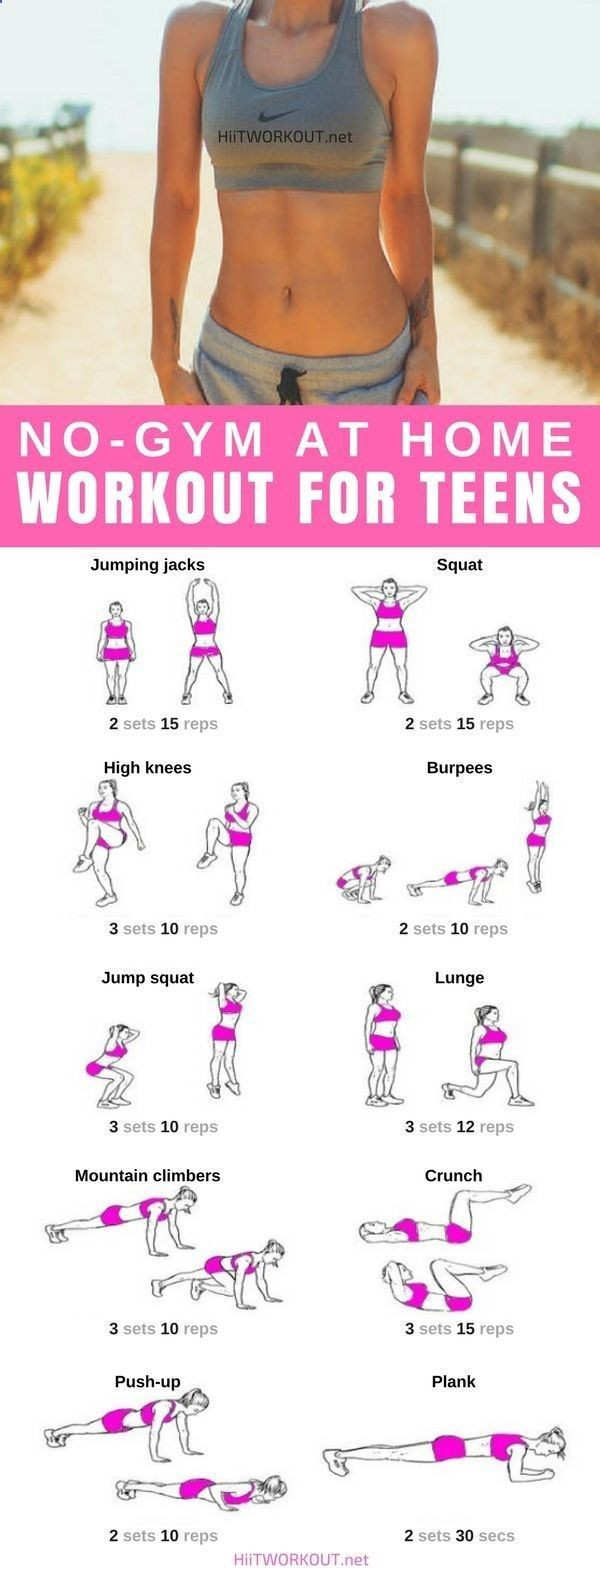 How To Lose Weight Quickly For Teens Workouts
 At Home No Equipment Workout for Teens